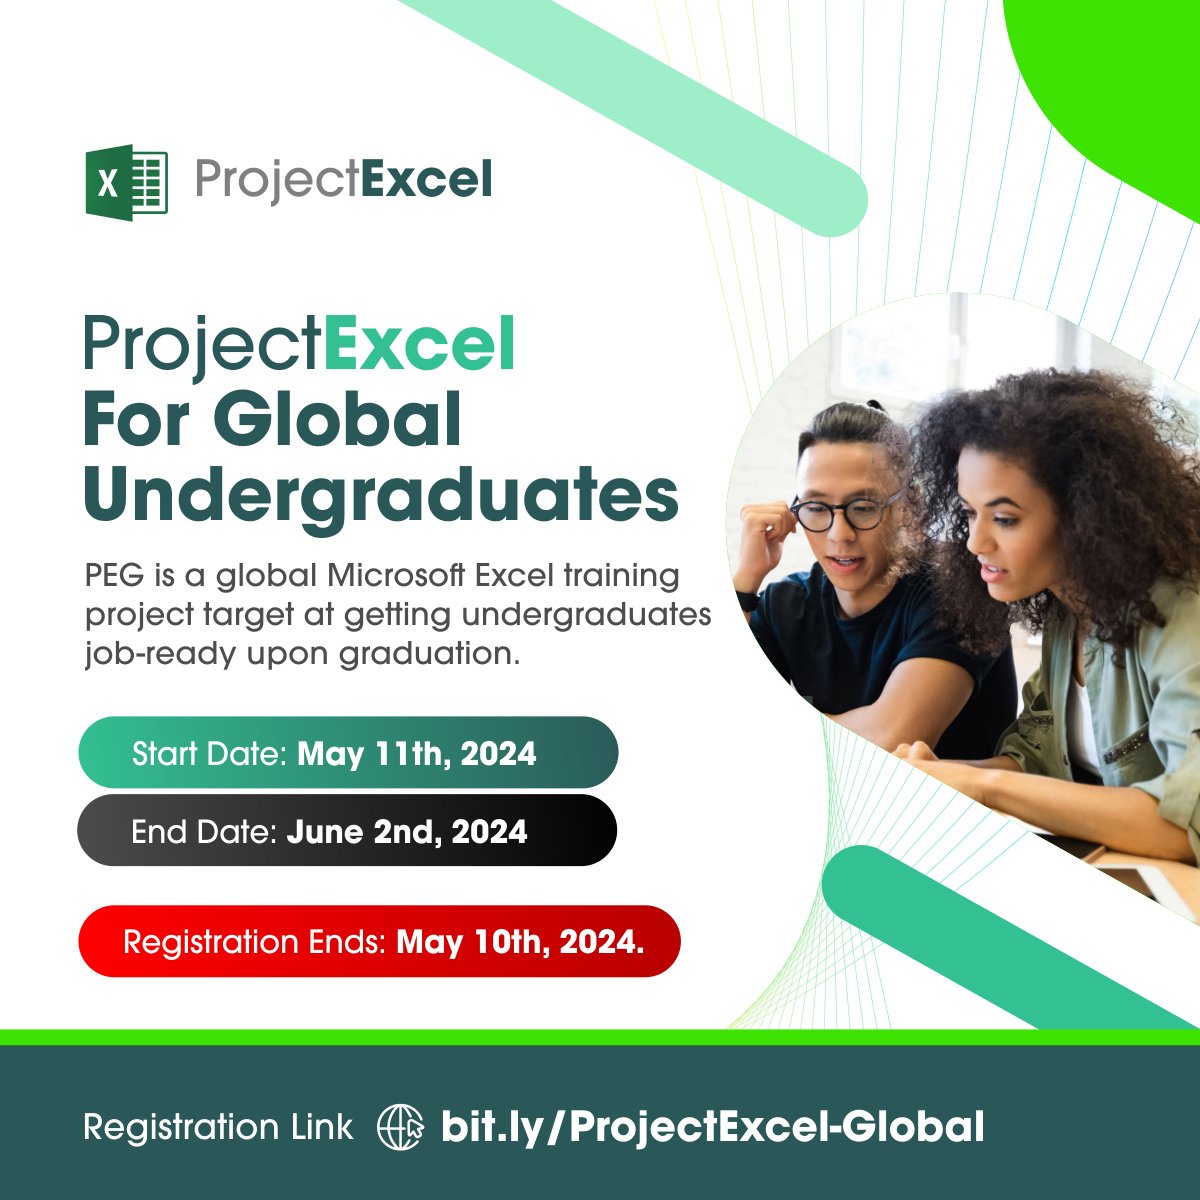 Are you an undergraduate in any University across the globe and will like to learn how to use Microsoft Excel efficiently? Kindly register for this training as I will be training 1000 undergraduates on how to use Microsoft Excel efficiently - bit.ly/ProjectExcel-G…